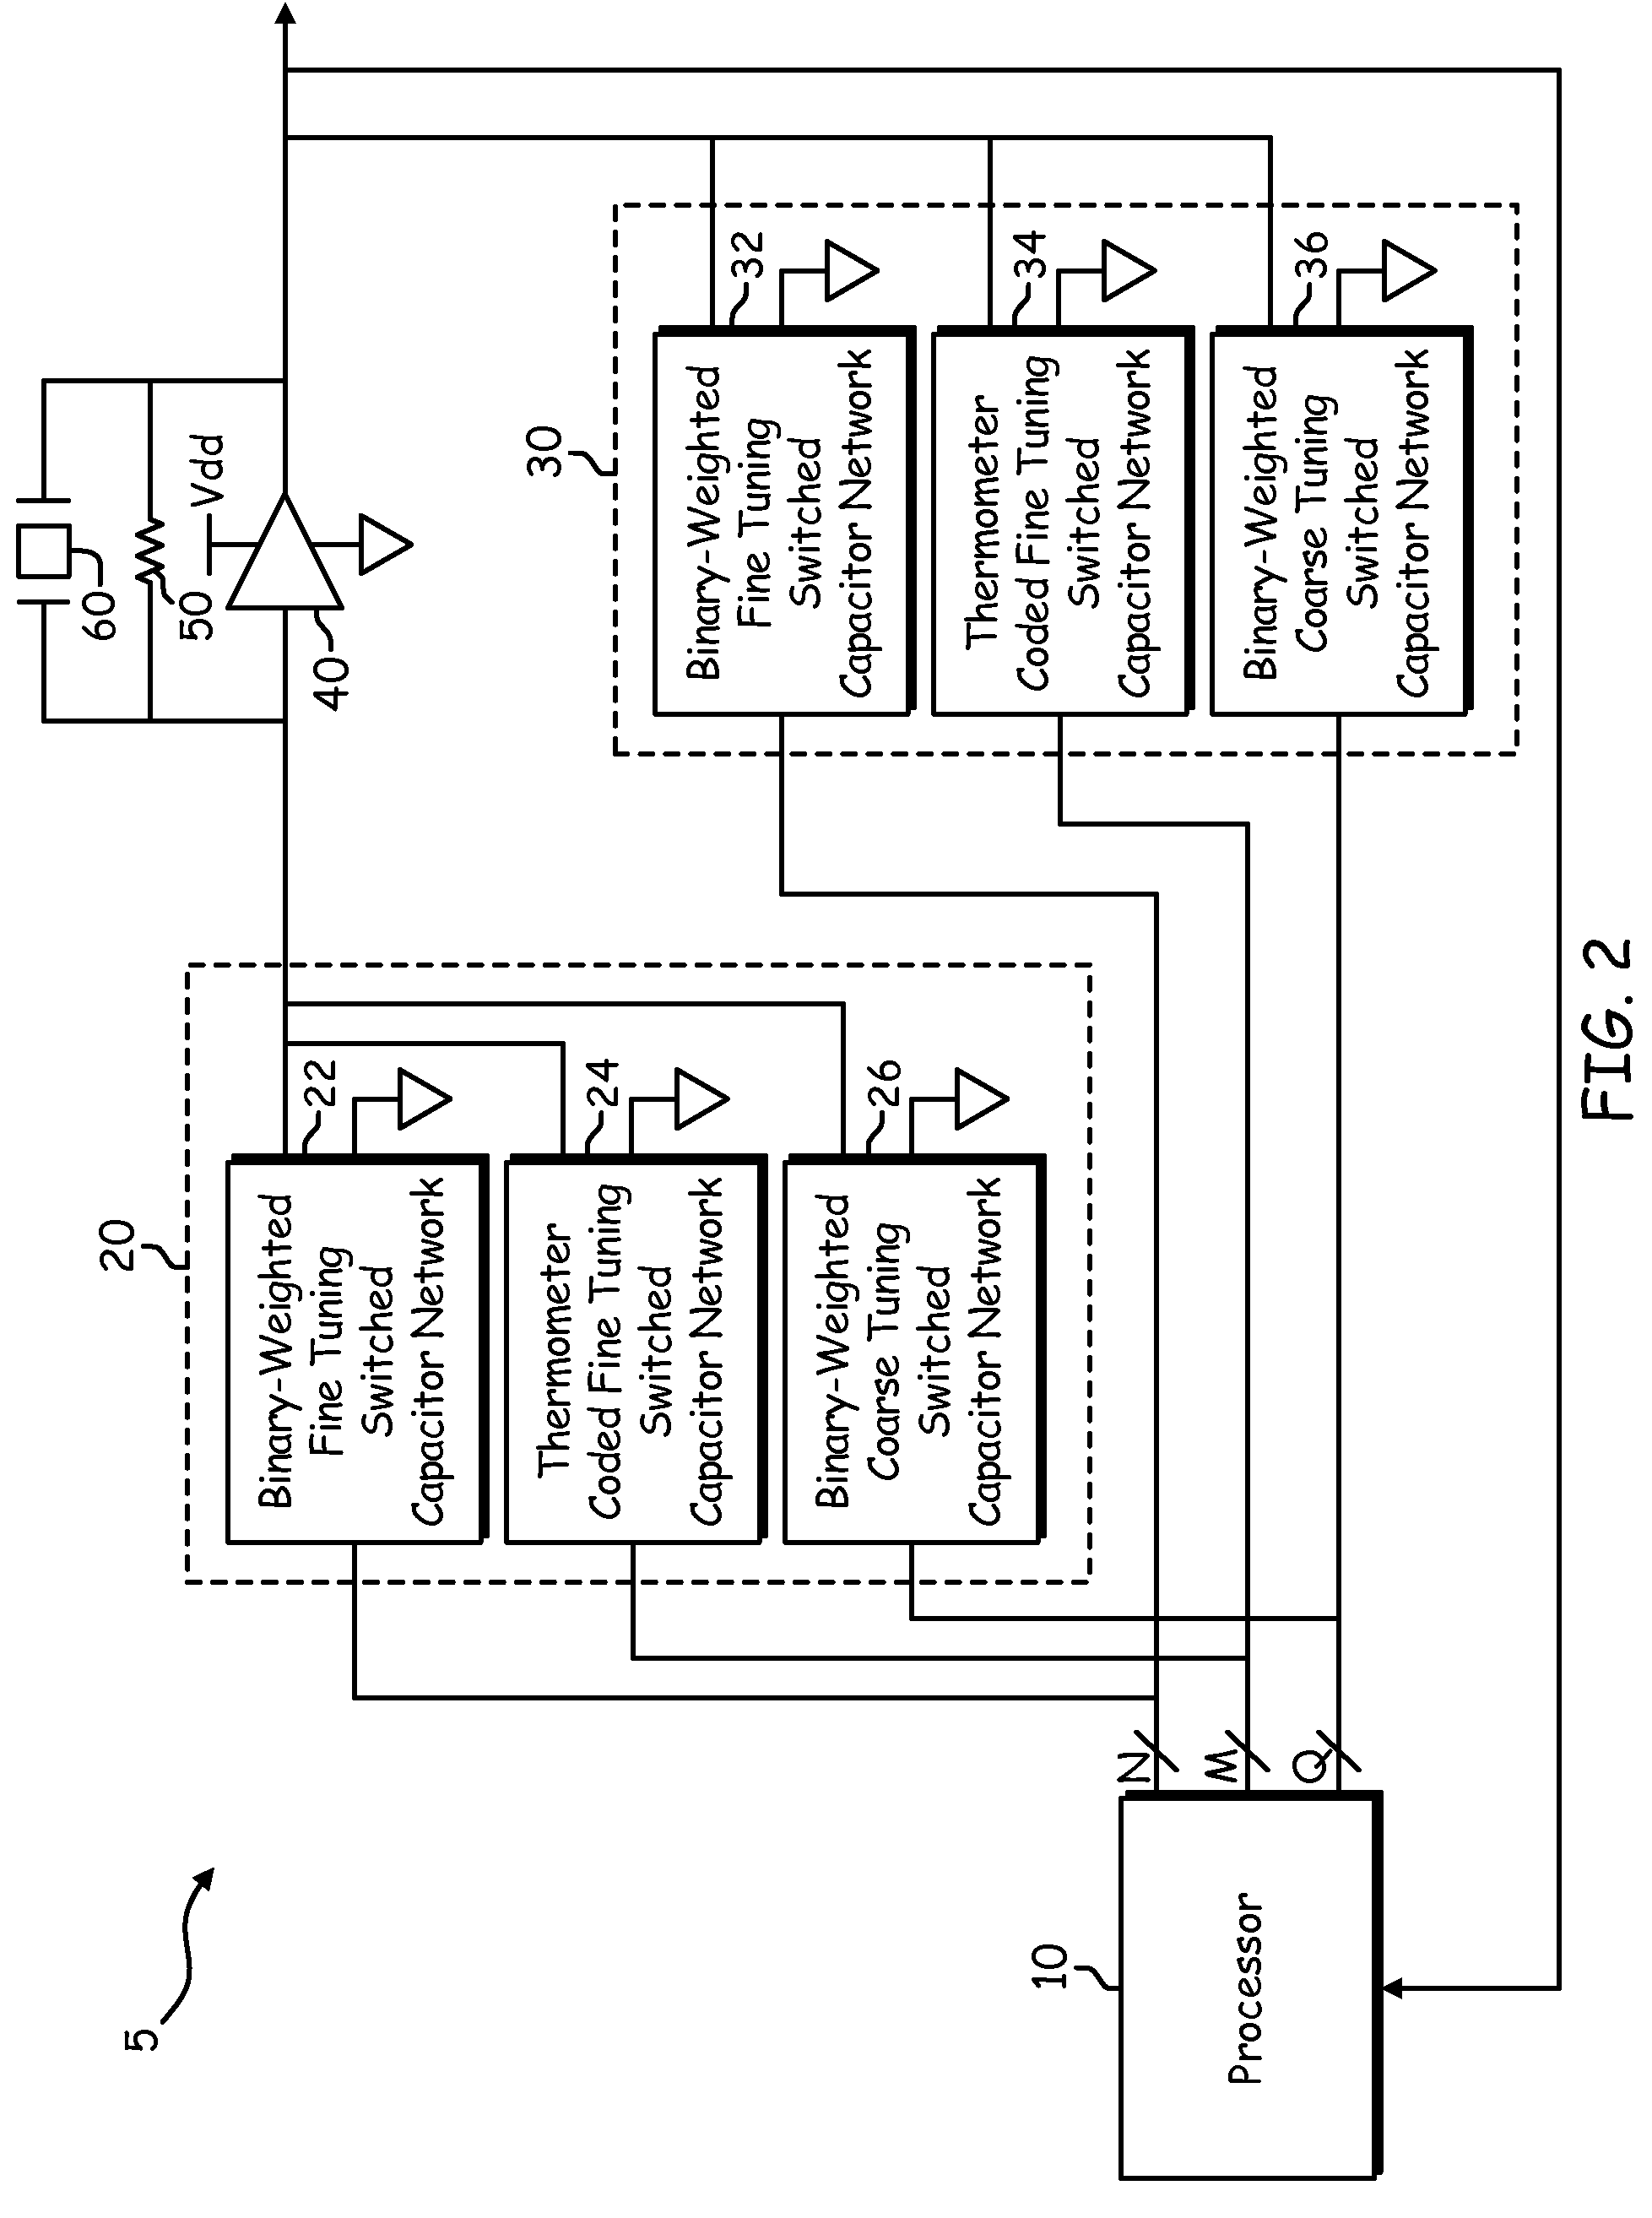 Monotonic frequency tuning technique for DCXO in cellular applications